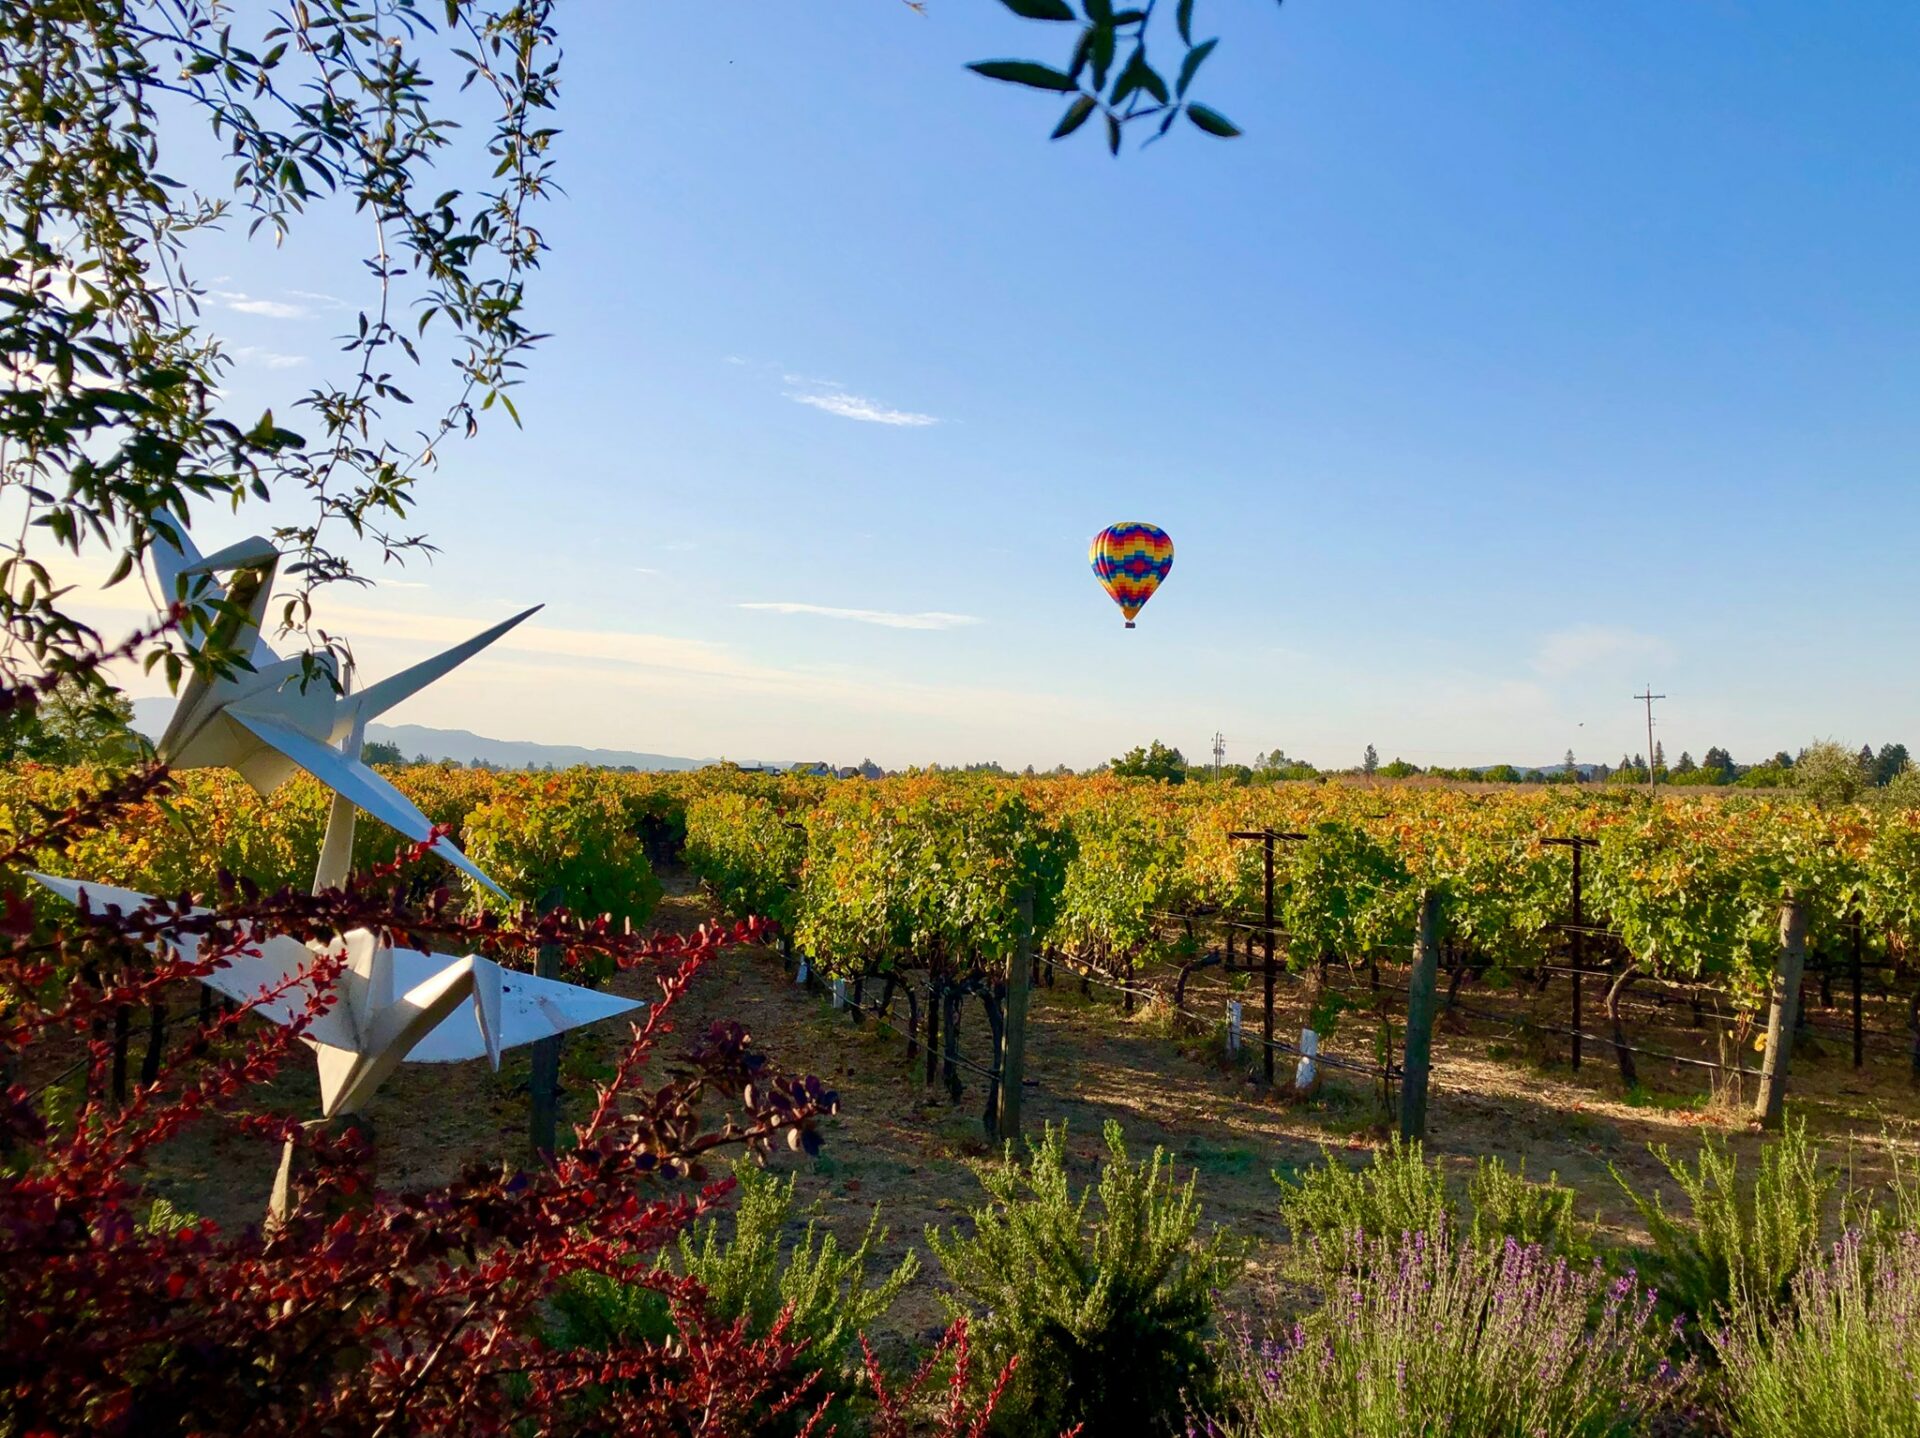 Image of a hot air ballon floating above a vineyard in Napa Valley, CA